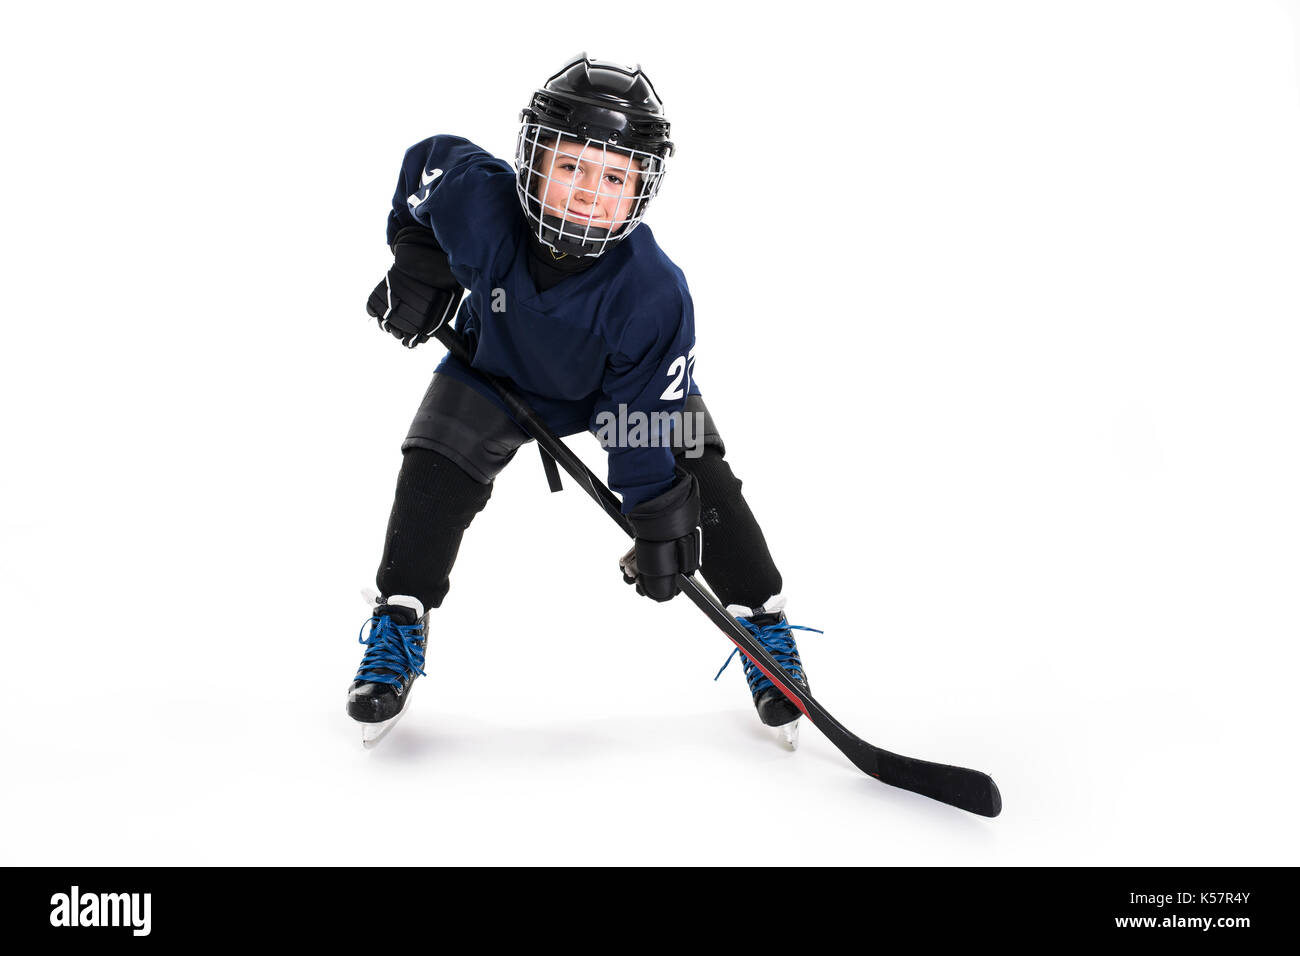 Young boy in ice hockey gear against white Stock Photo